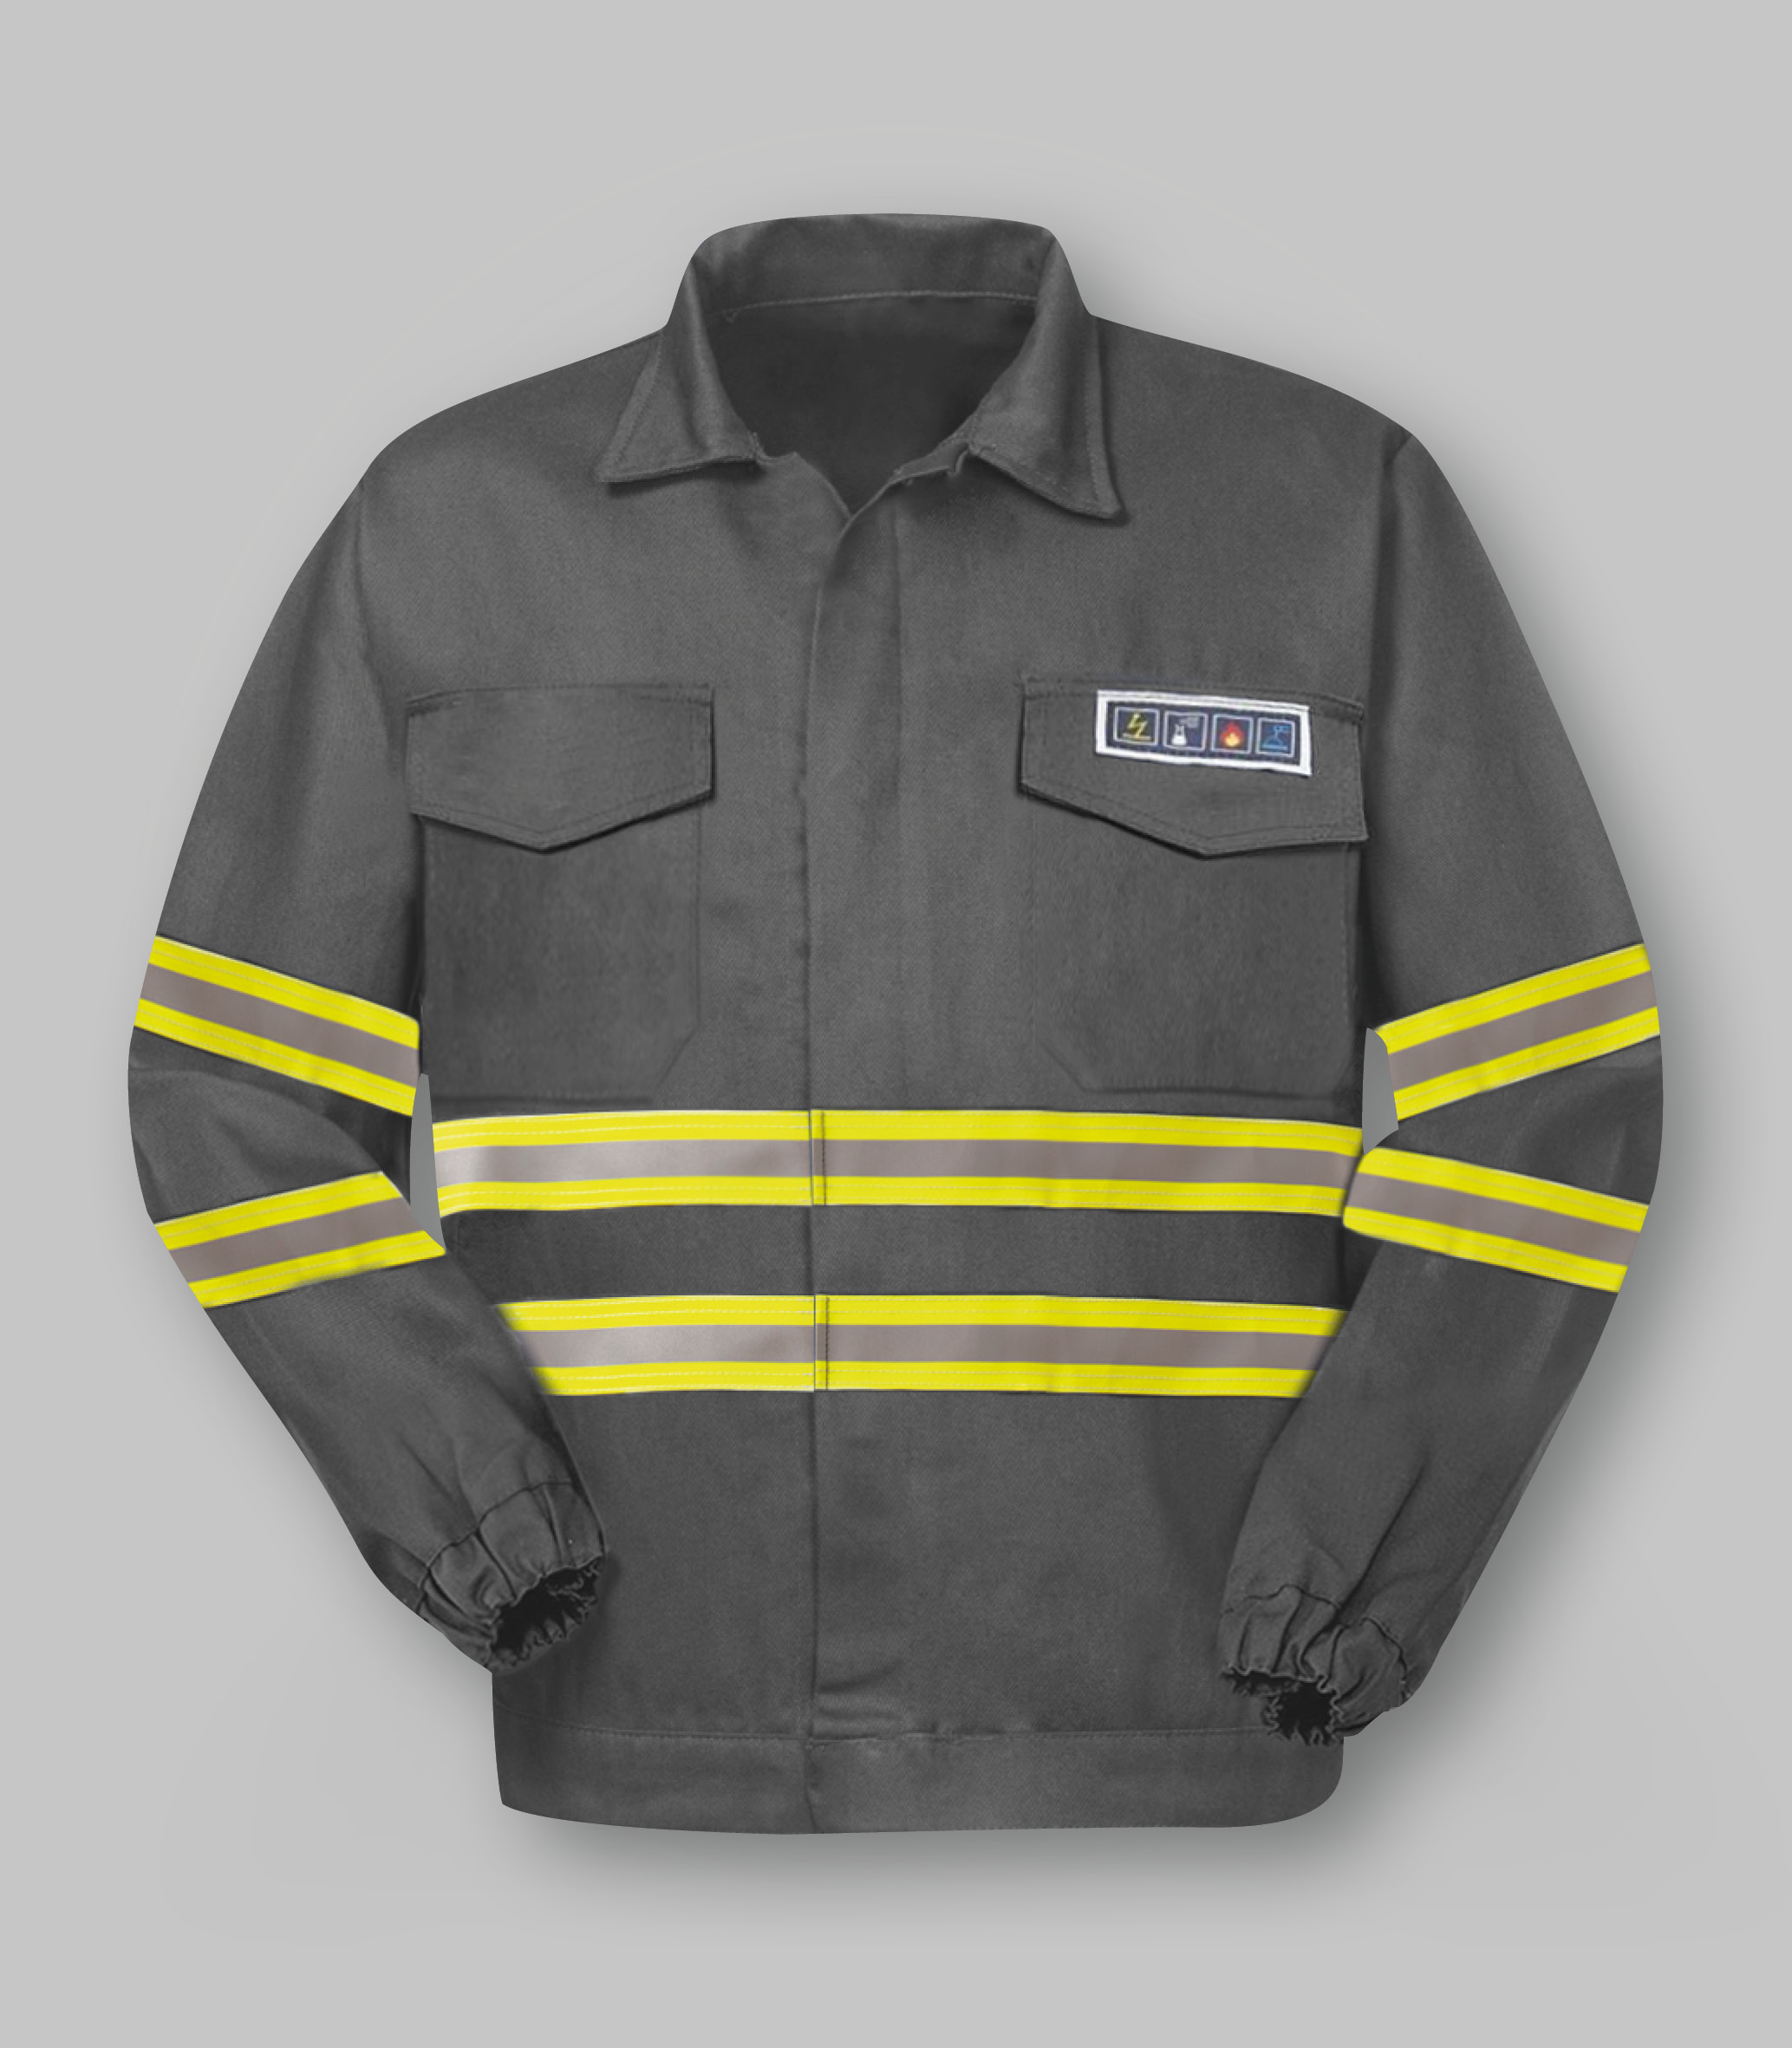 Fireproof and antistatic jacket